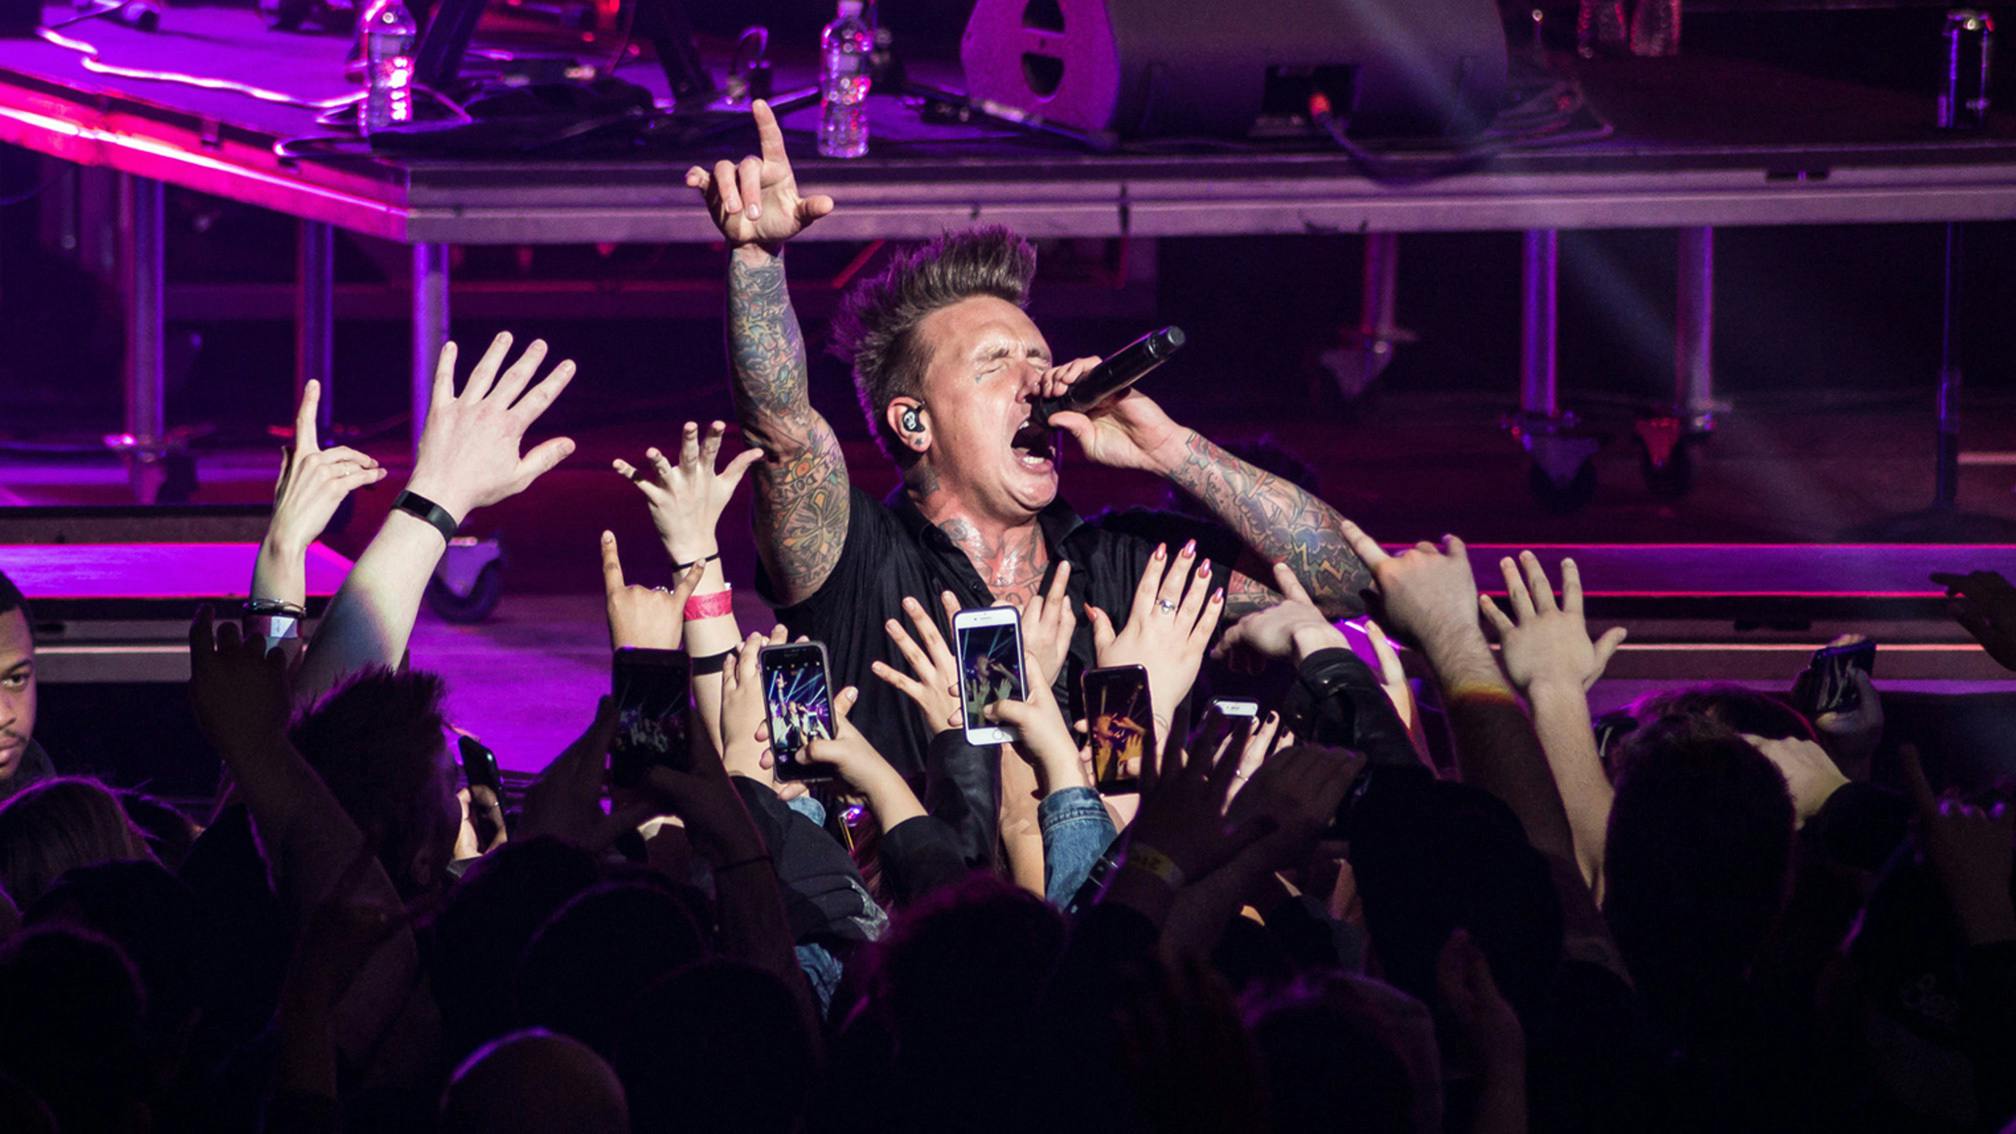 Papa Roach's Jacoby Shaddix: "We're not gonna drop a new album and tour until 2022"